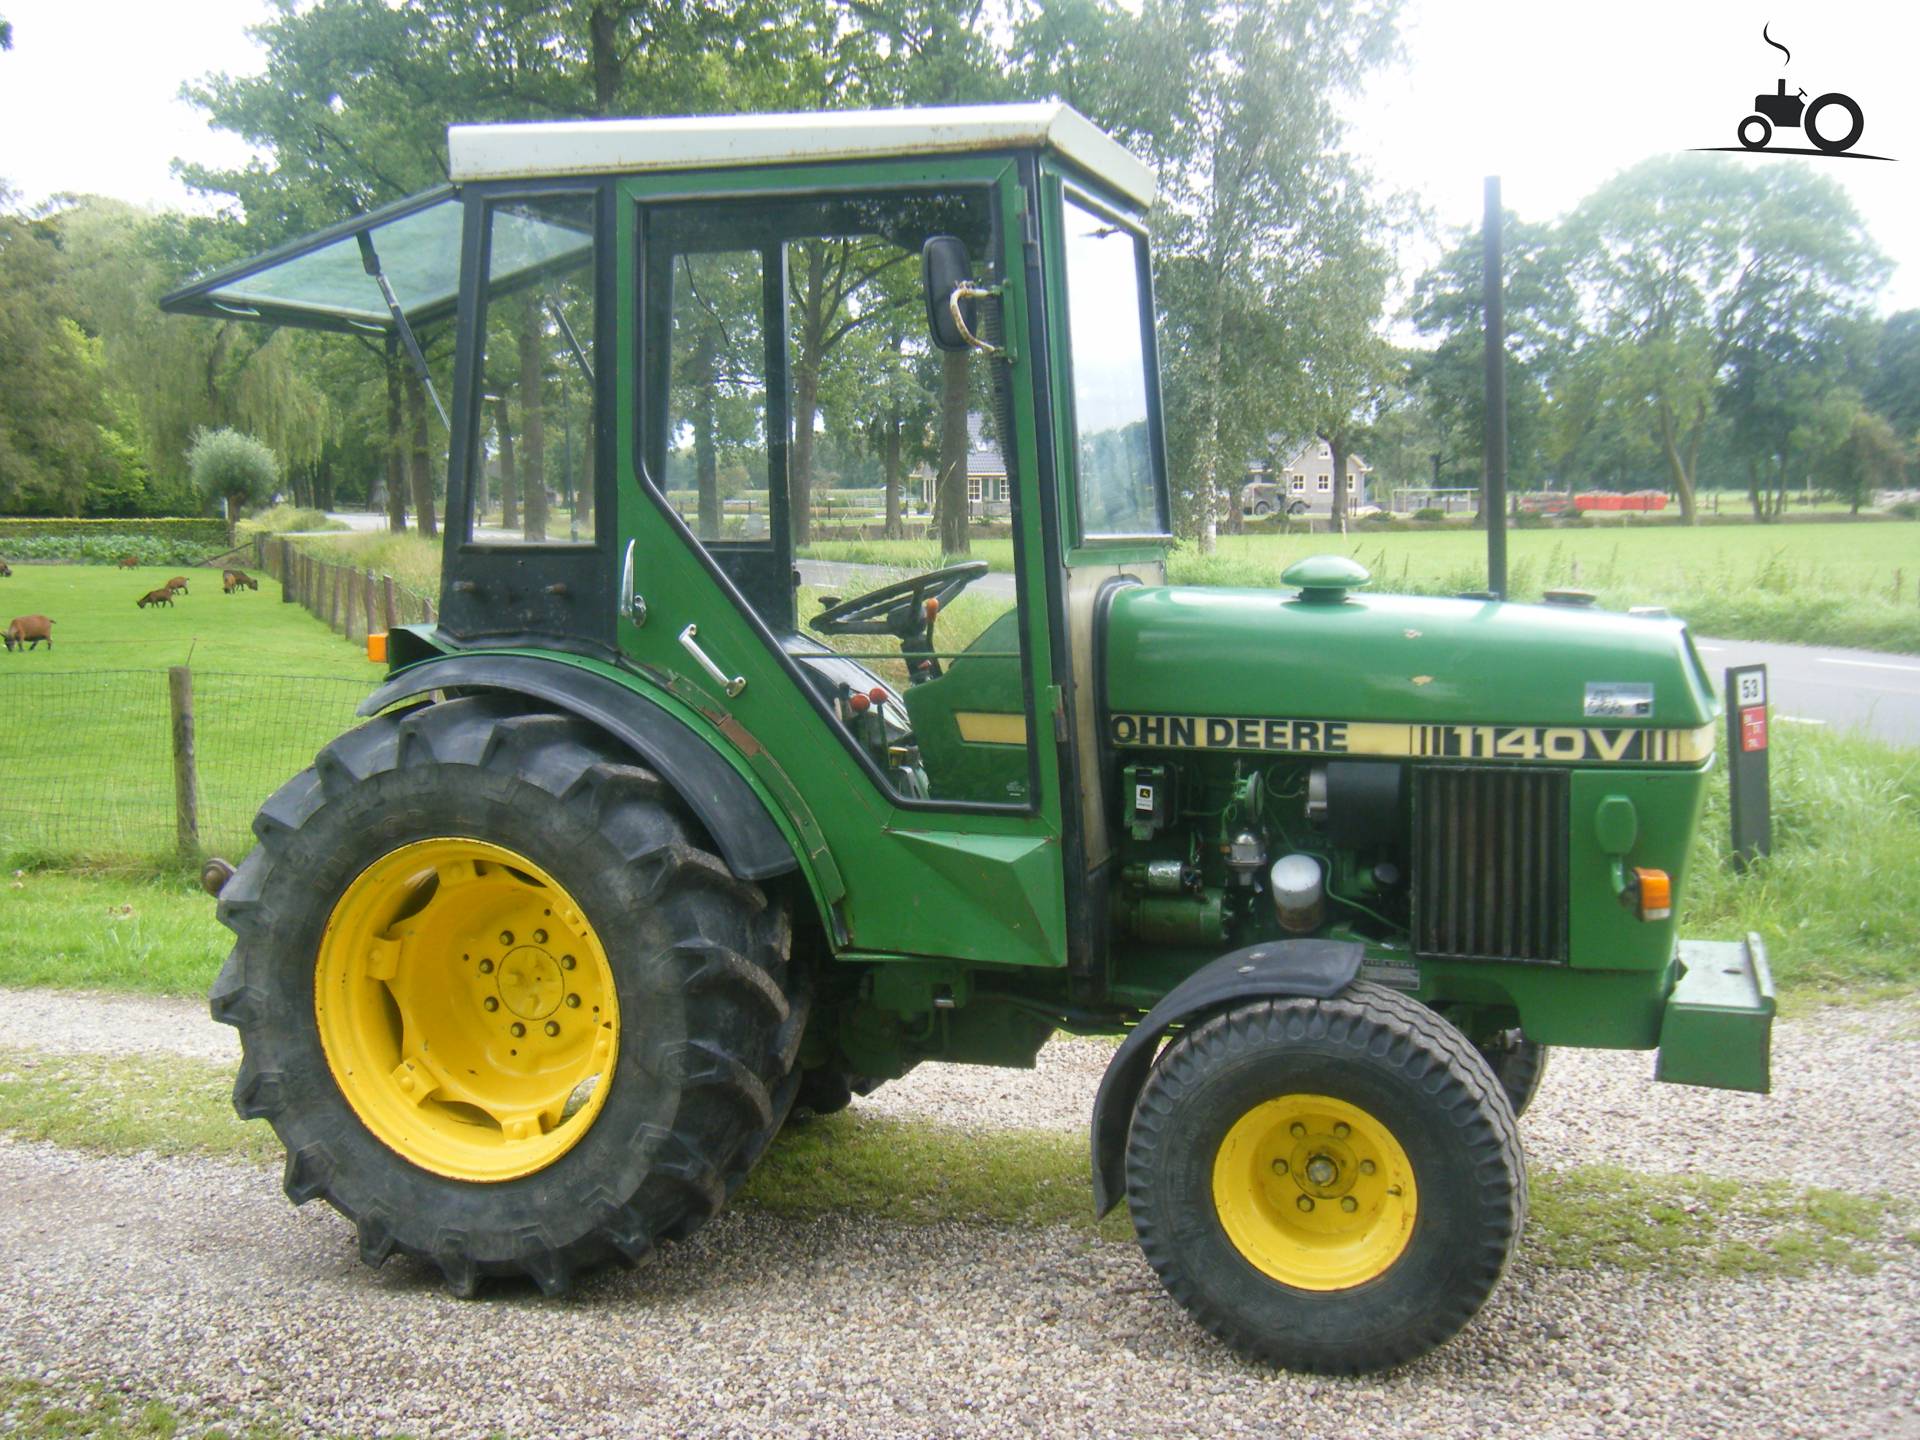 John Deere 1140 Specs and data - Everything about the John Deere 1140